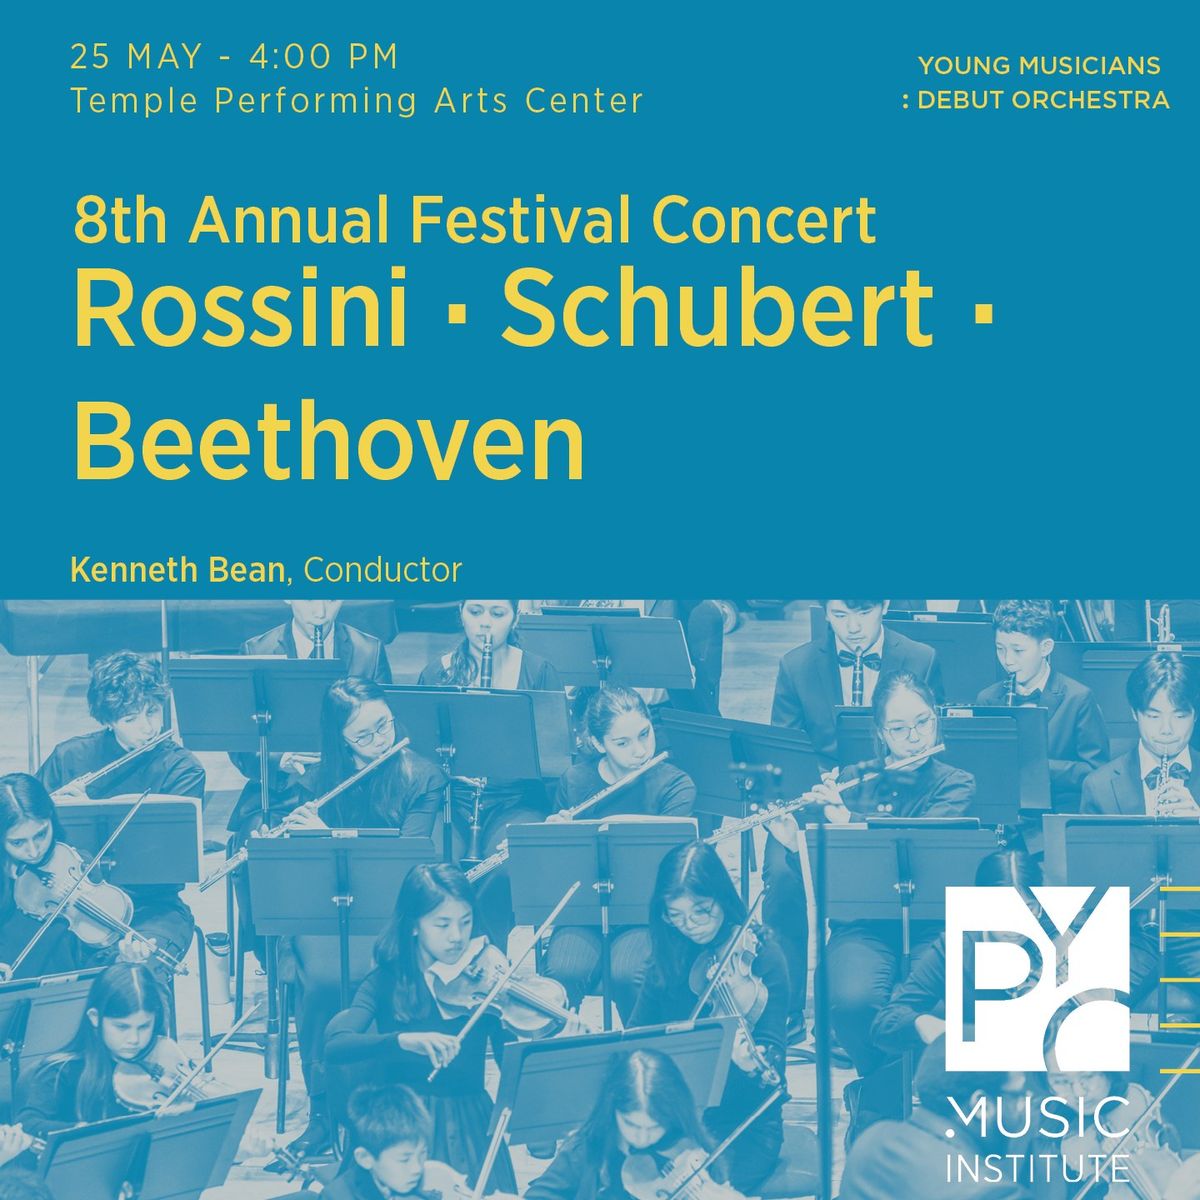 Young Musicians Debut Orchestra 8th Annual Festival Concert